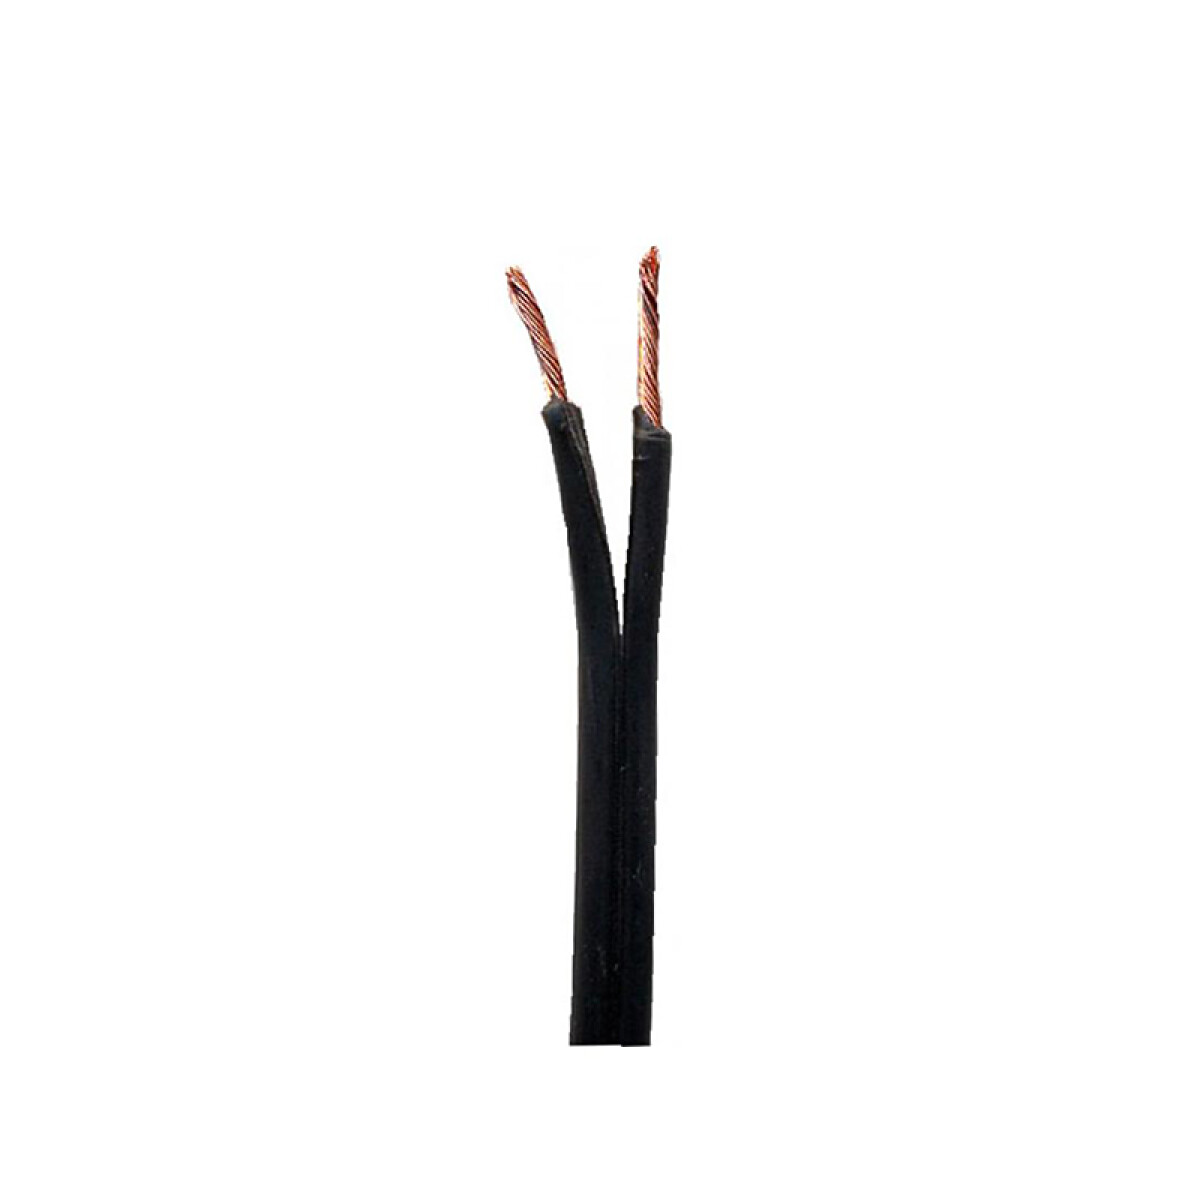 Cable gemelo negro 2x1mm² - Rollo 100 mts. - C95830 